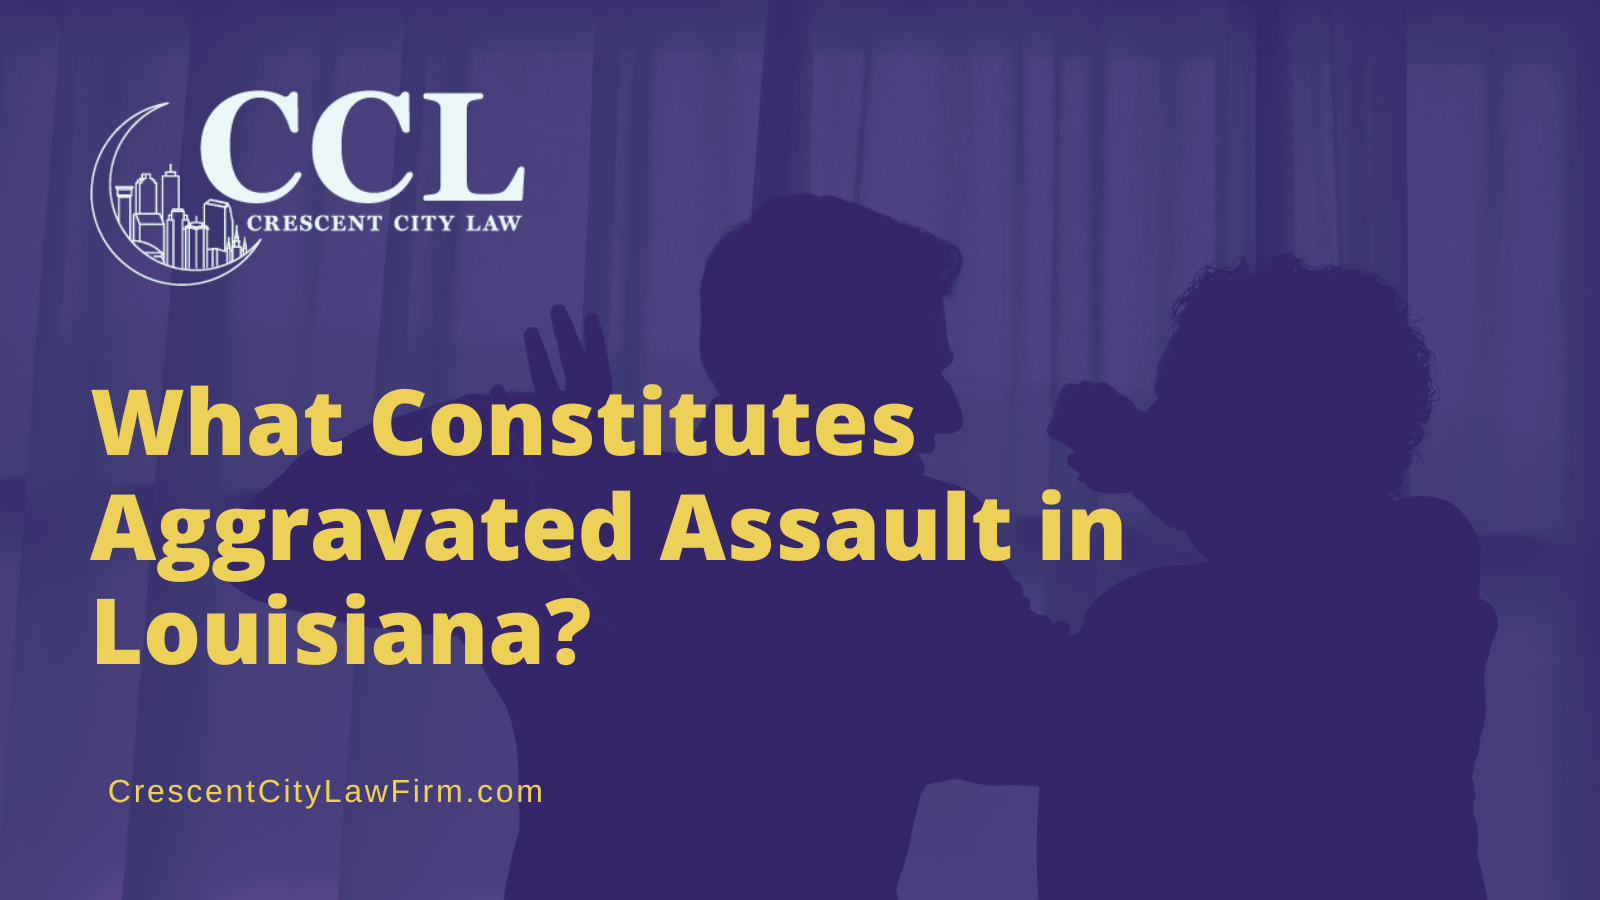 What Constitutes Aggravated Assault in Louisiana - crescent city law firm - new orleans la